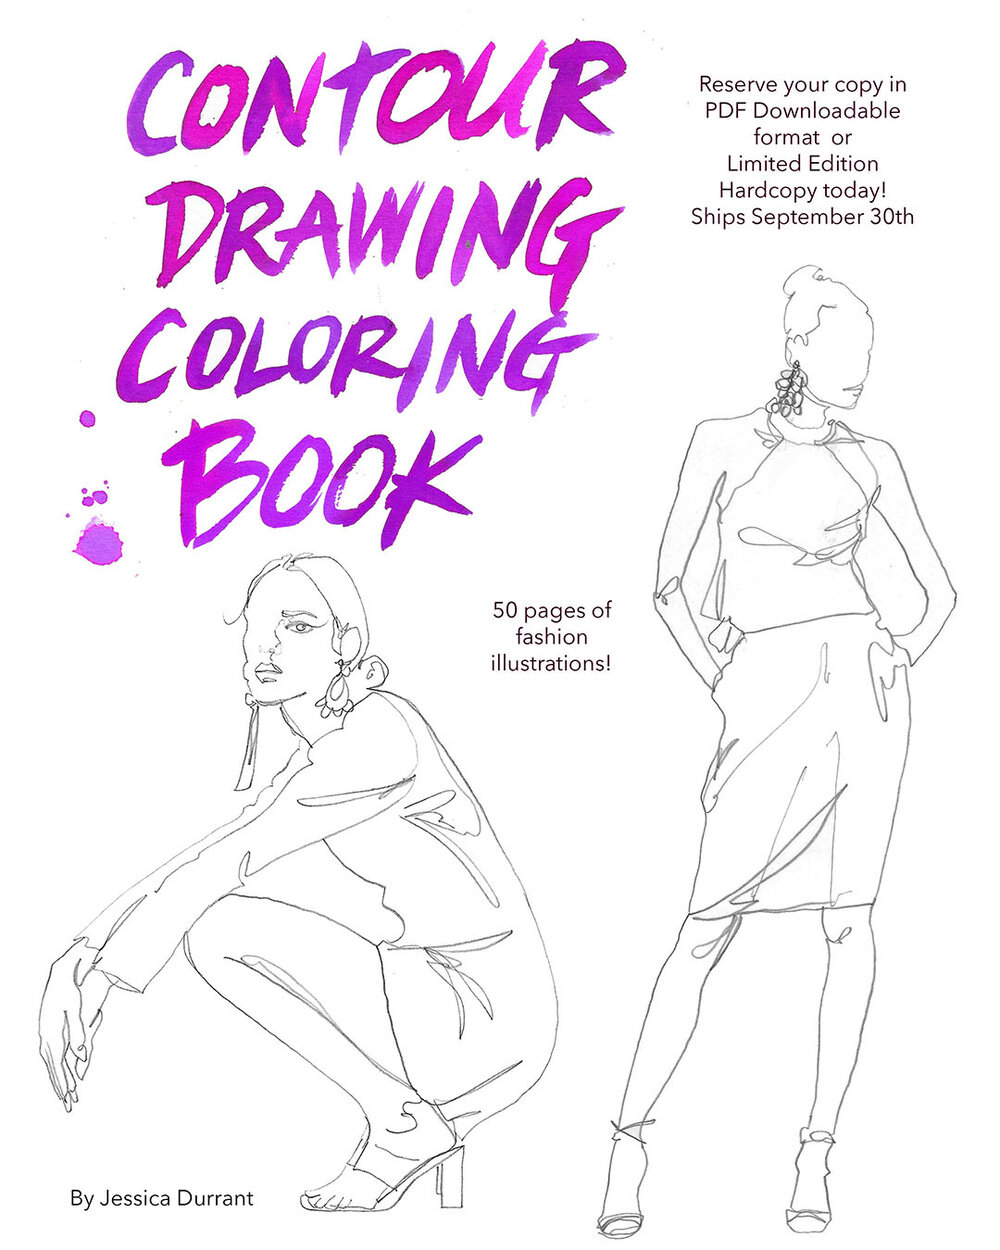 Contour drawing coloring book in pdf download copy format â jessica durrant illustration